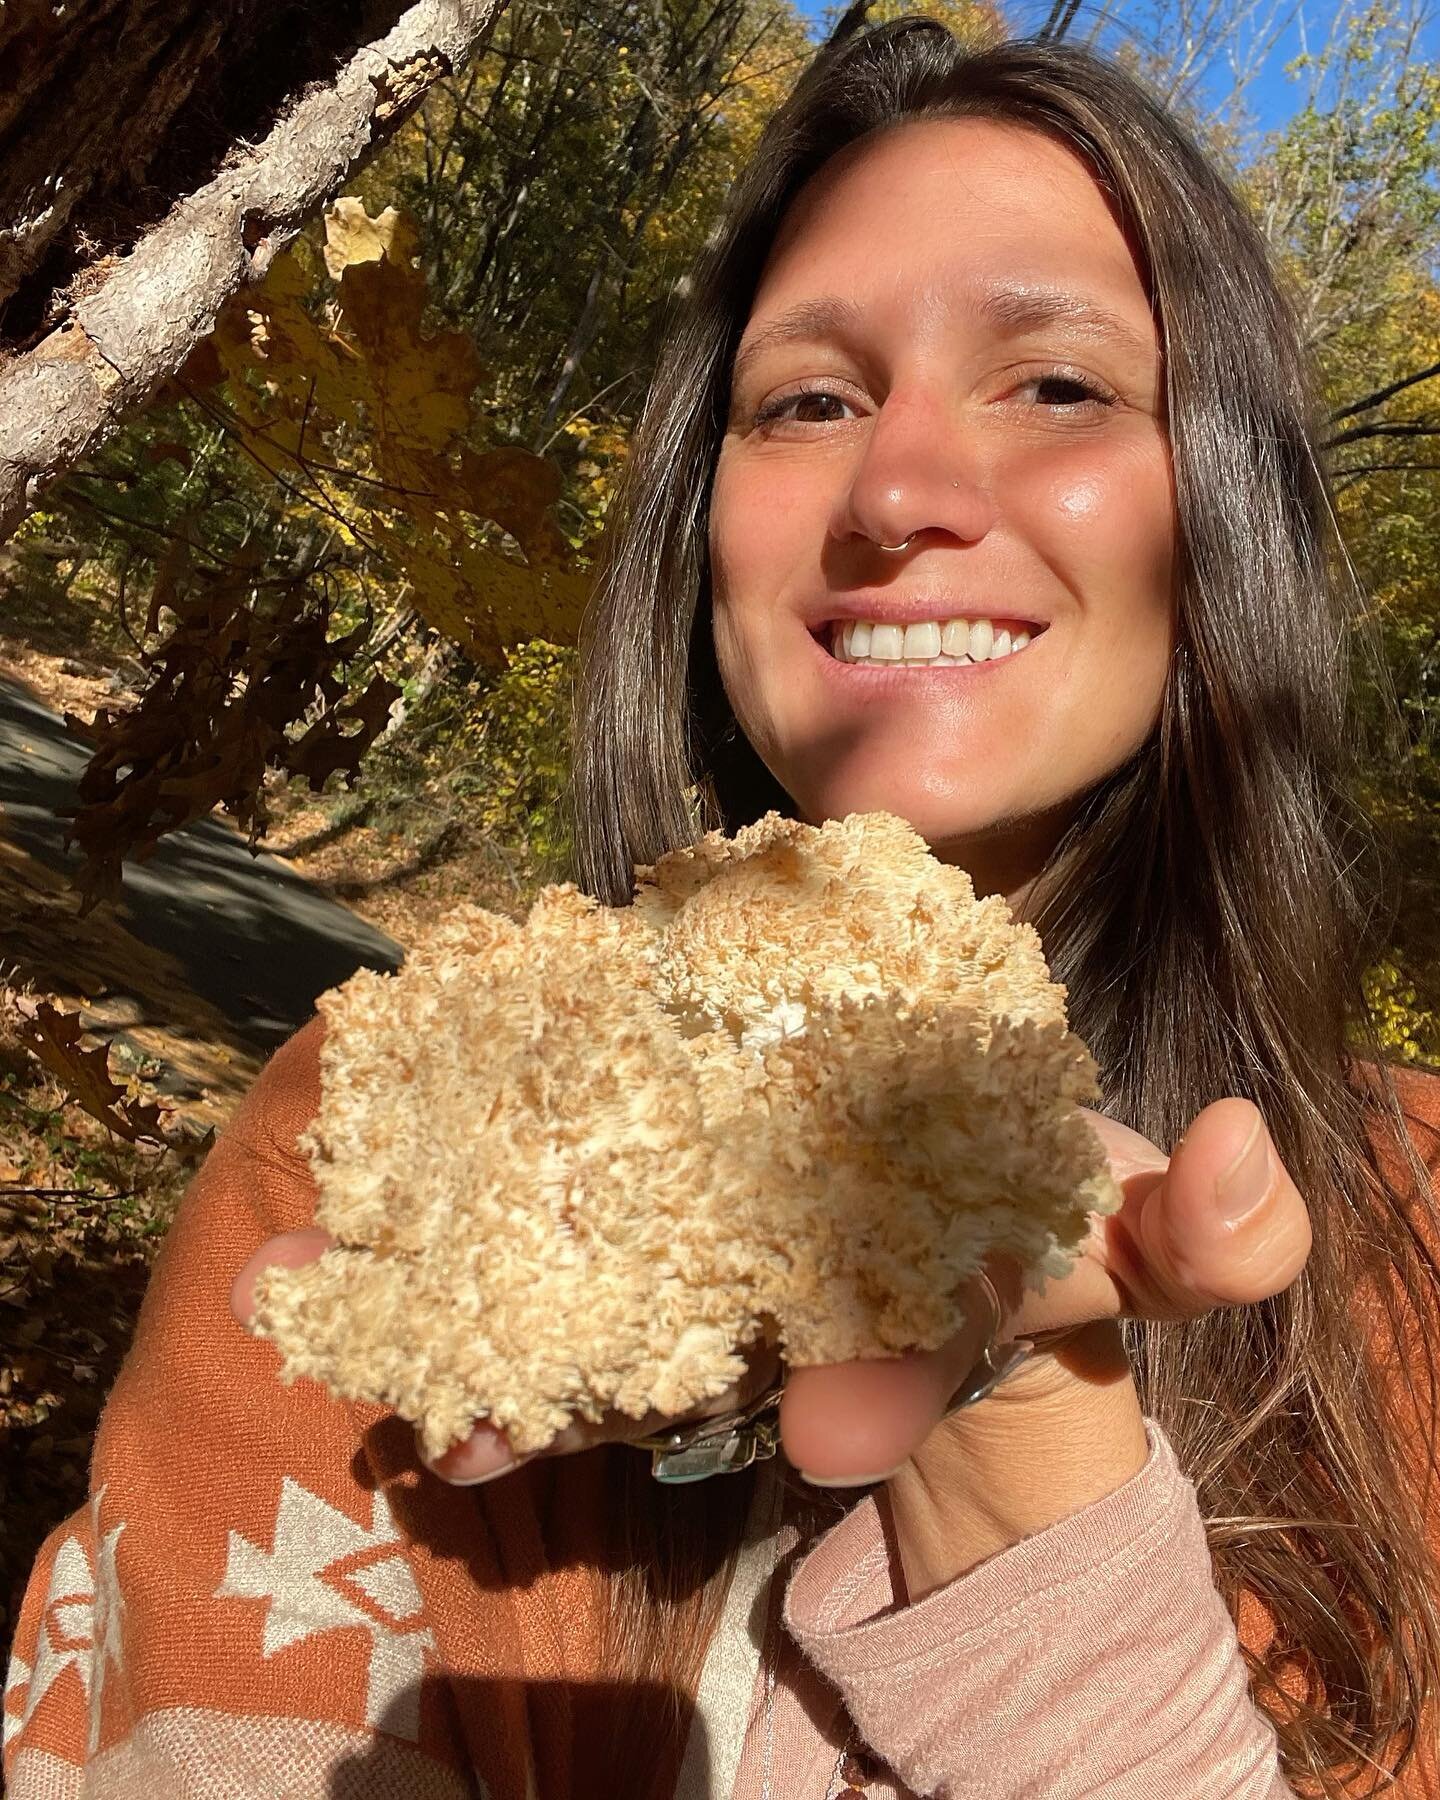 Hericium americanum and I will see ya at the foray table tmrw! @culturedcafect 🐻🦷🍄 

#connecticut #connecticutmushrooms #foragedfood #foraging #hericiumamericanum #hericium #newhaven #bearsheadtooth